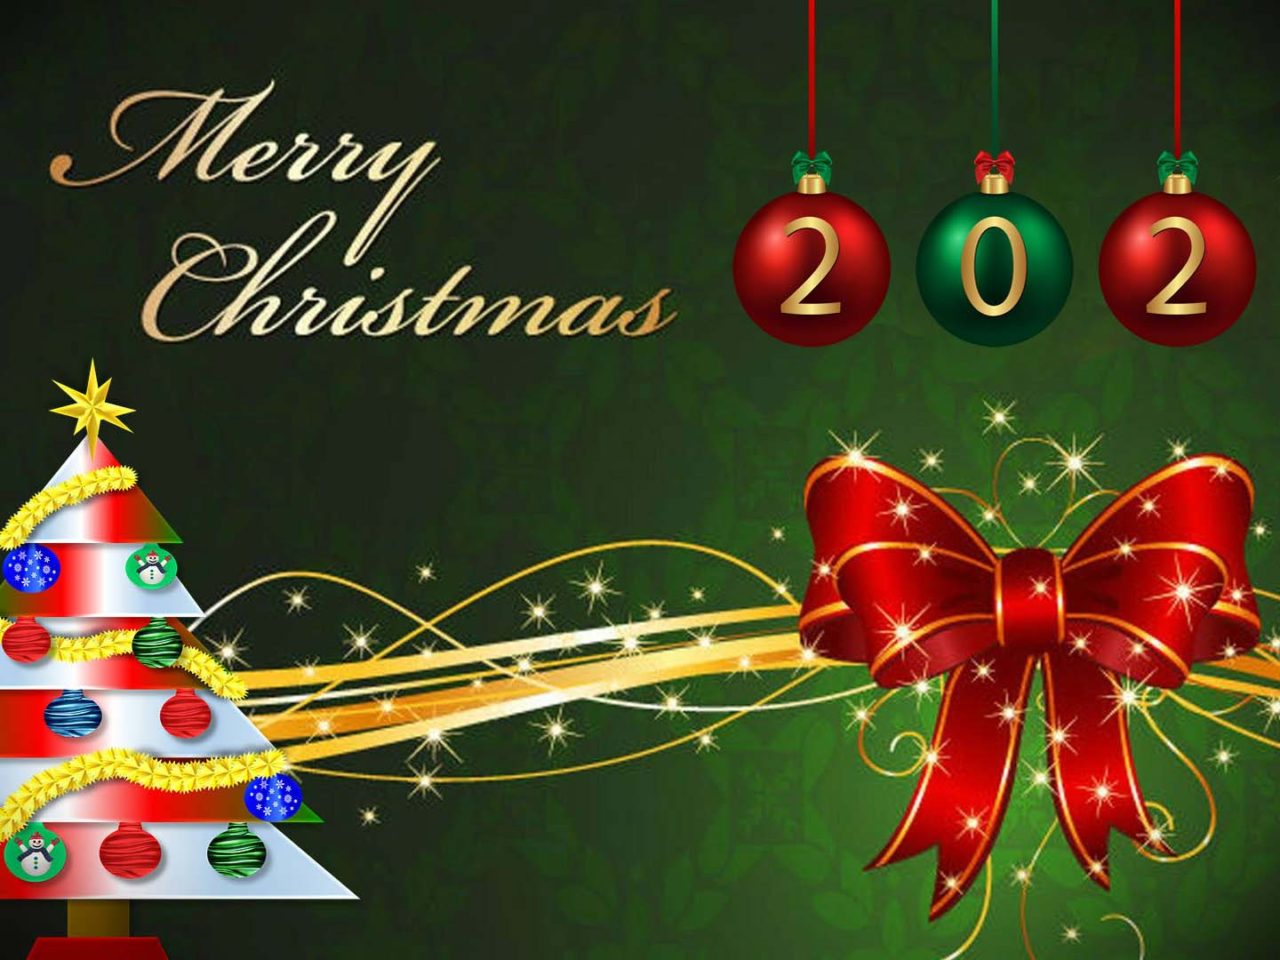 Merry Christmas 2022 Decorative Holiday Background Wallpapers13com 1280x960